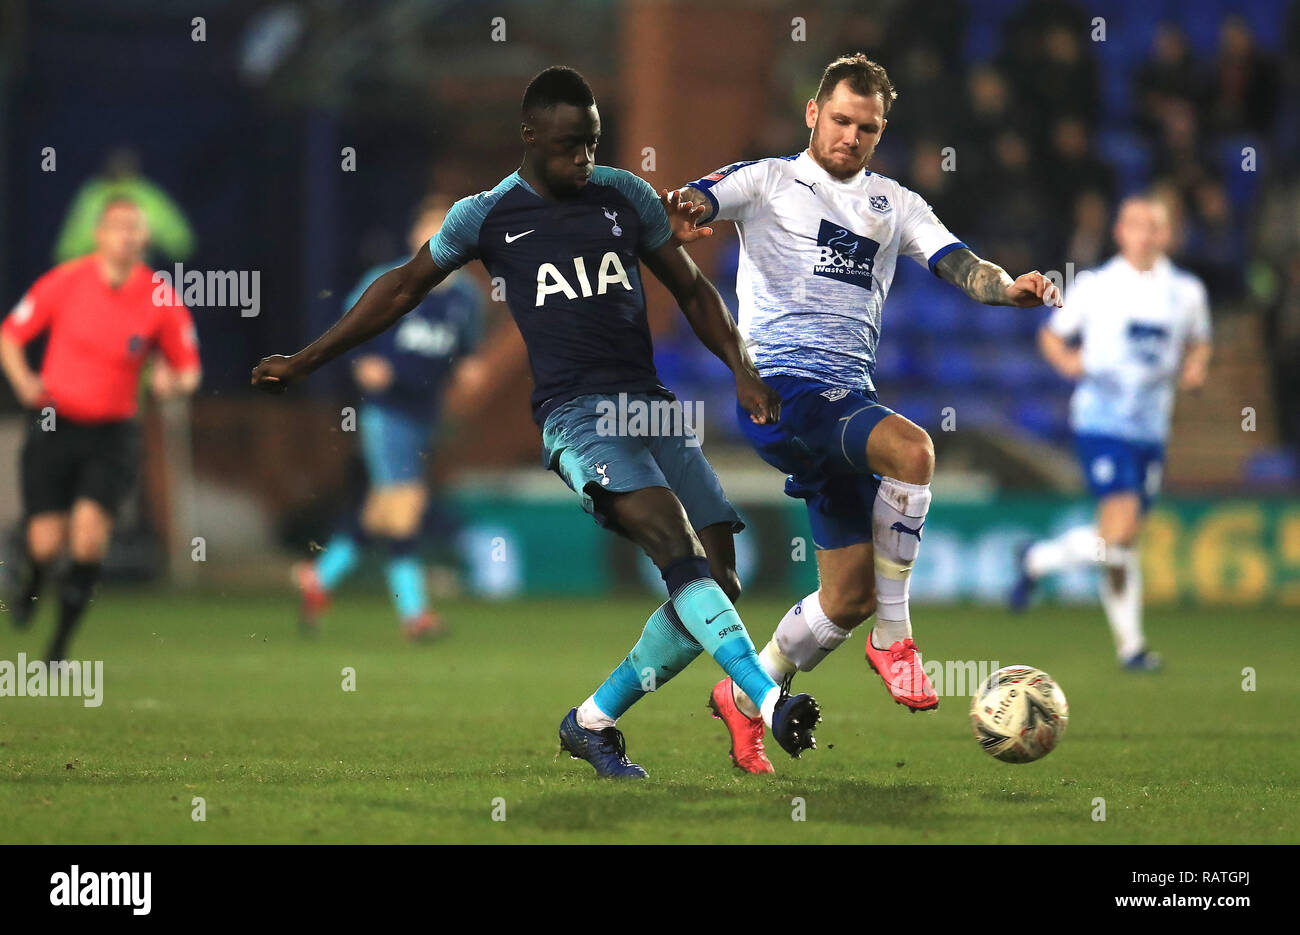 Tottenham Hotspur's Davinson Sanchez (left) and Tranmere Rovers' James Norwood battle for the ball during the Emirates FA Cup, third round match at Prenton Park, Birkenhead. Stock Photo